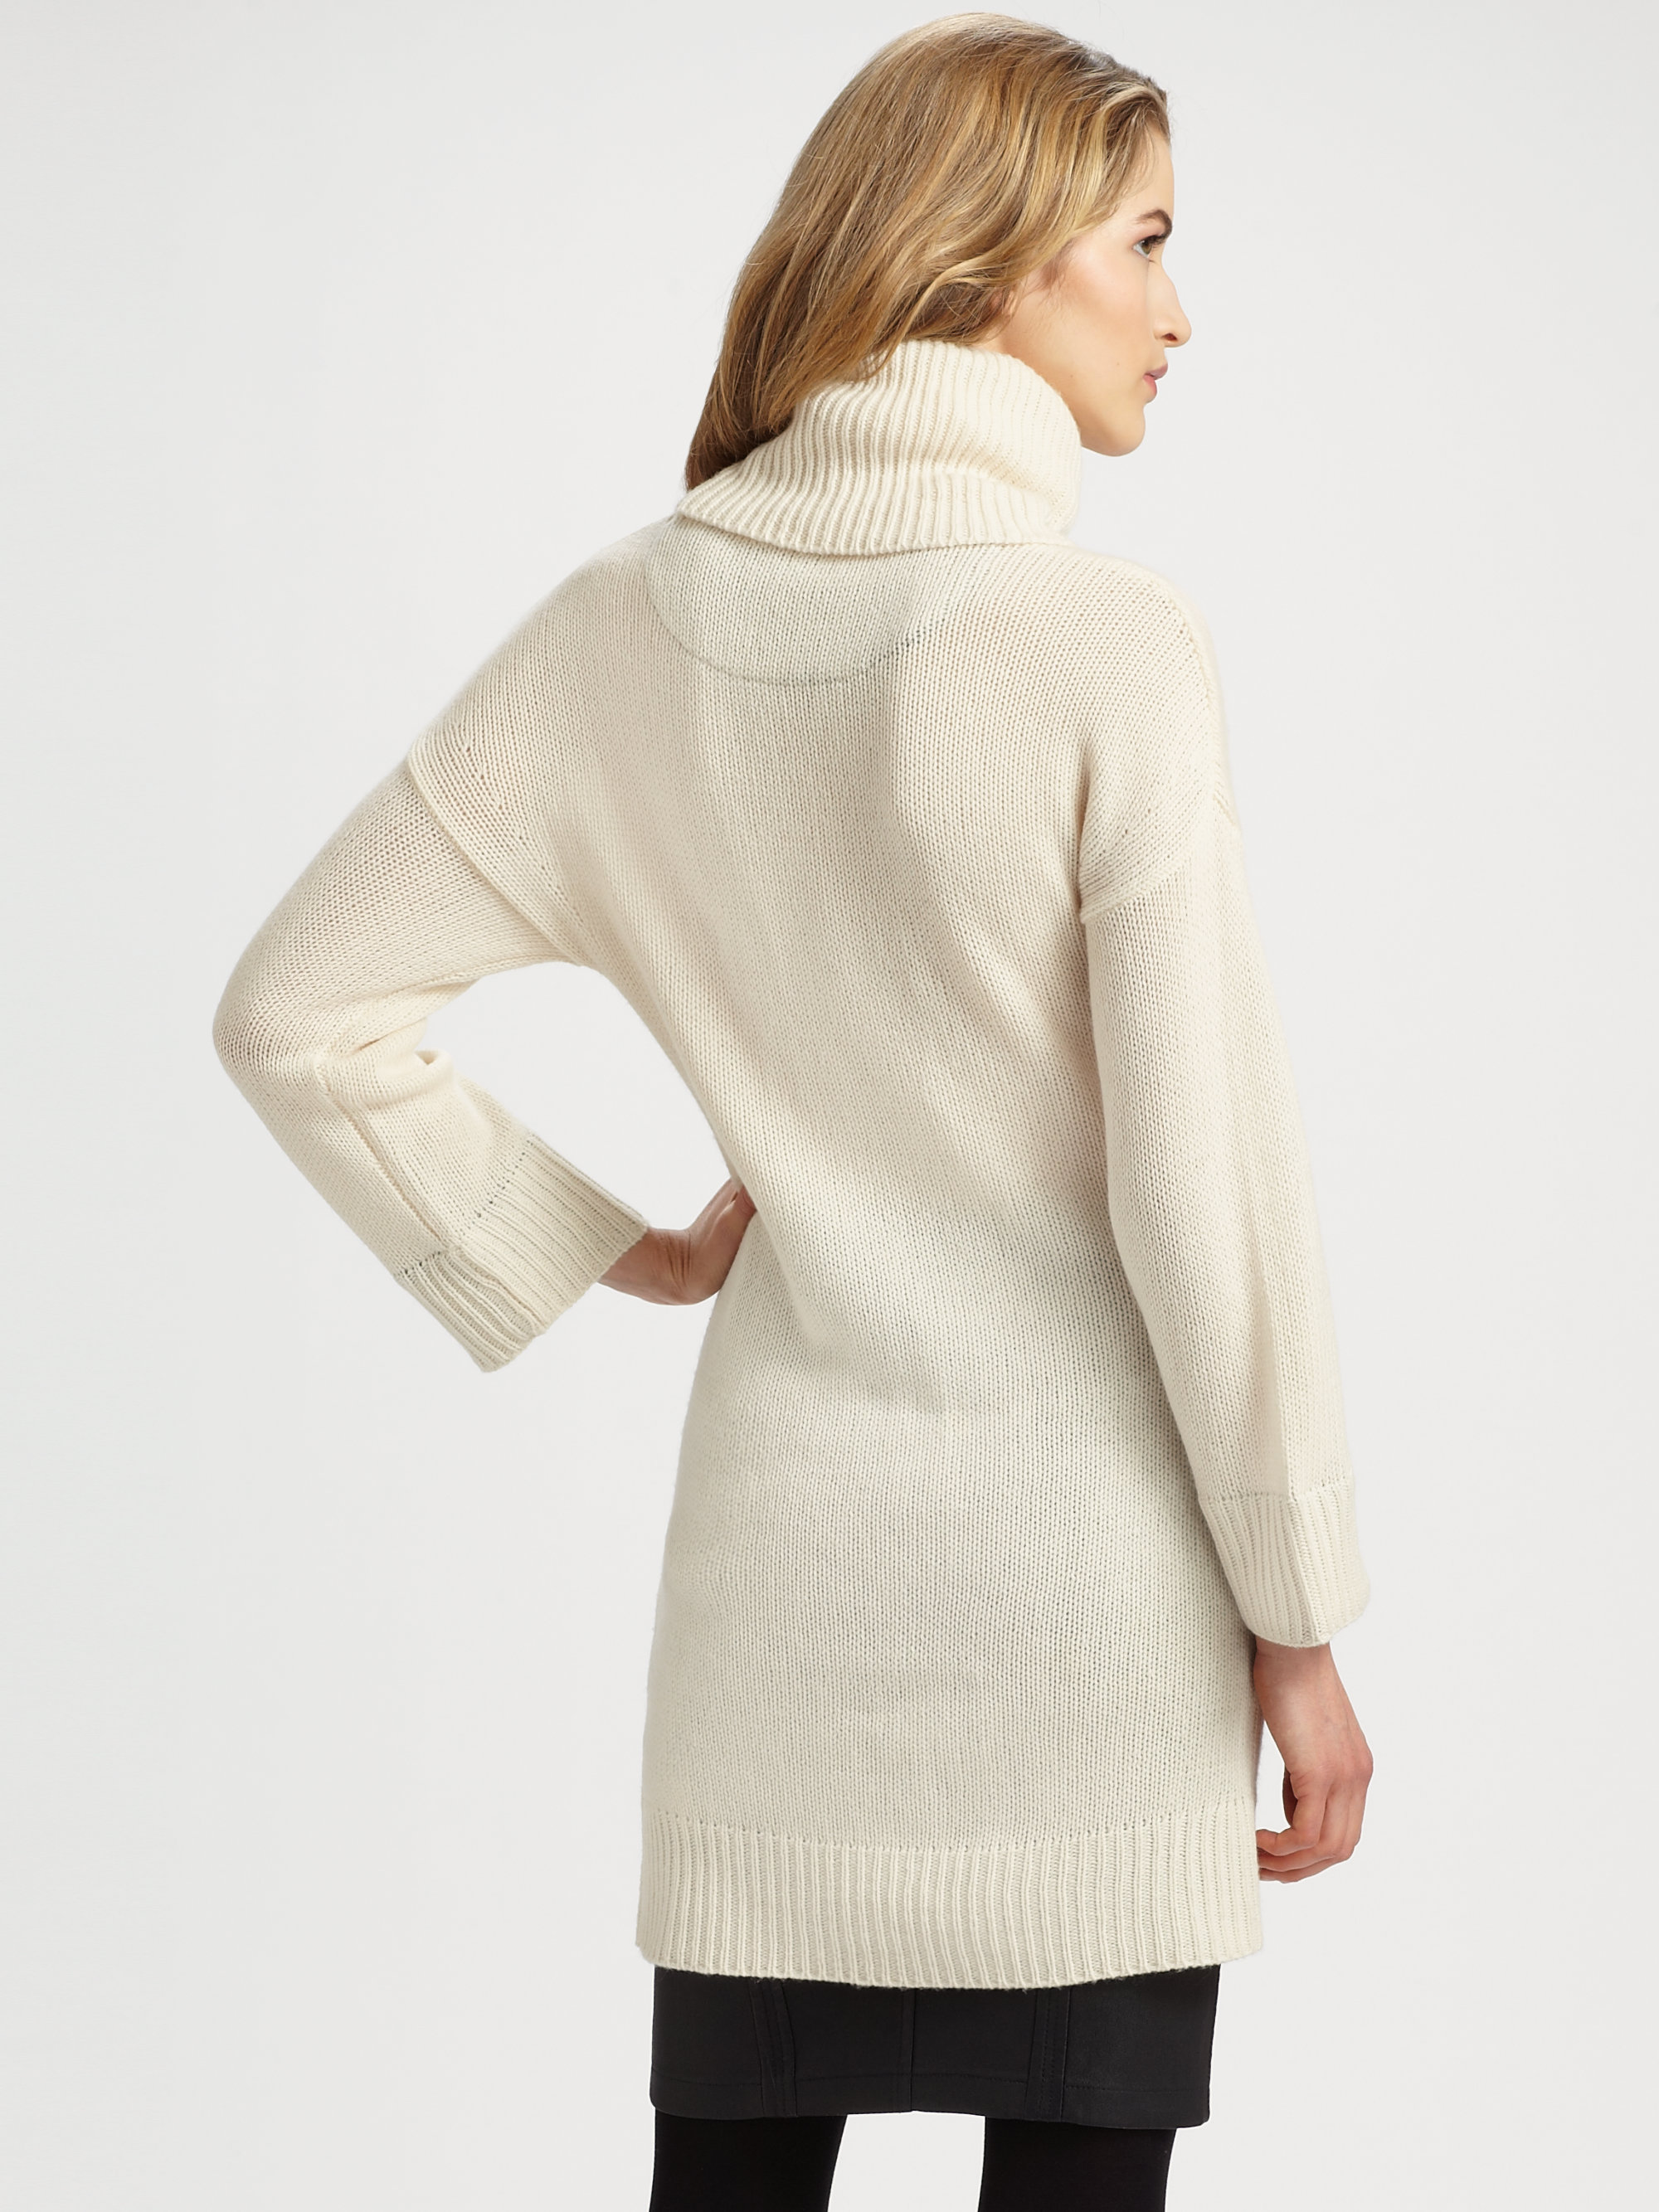 Lyst - Burberry brit Chunky Turtleneck Tunic Sweater in Natural